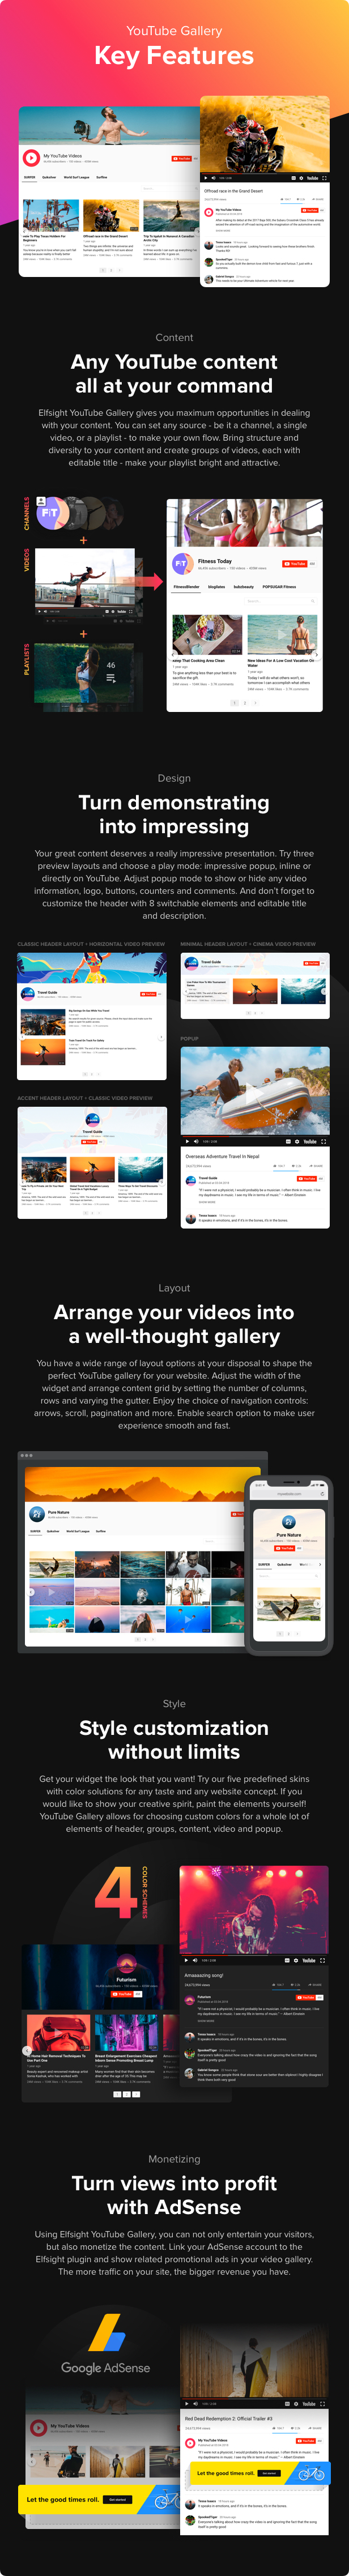 YouTube Gallery Features